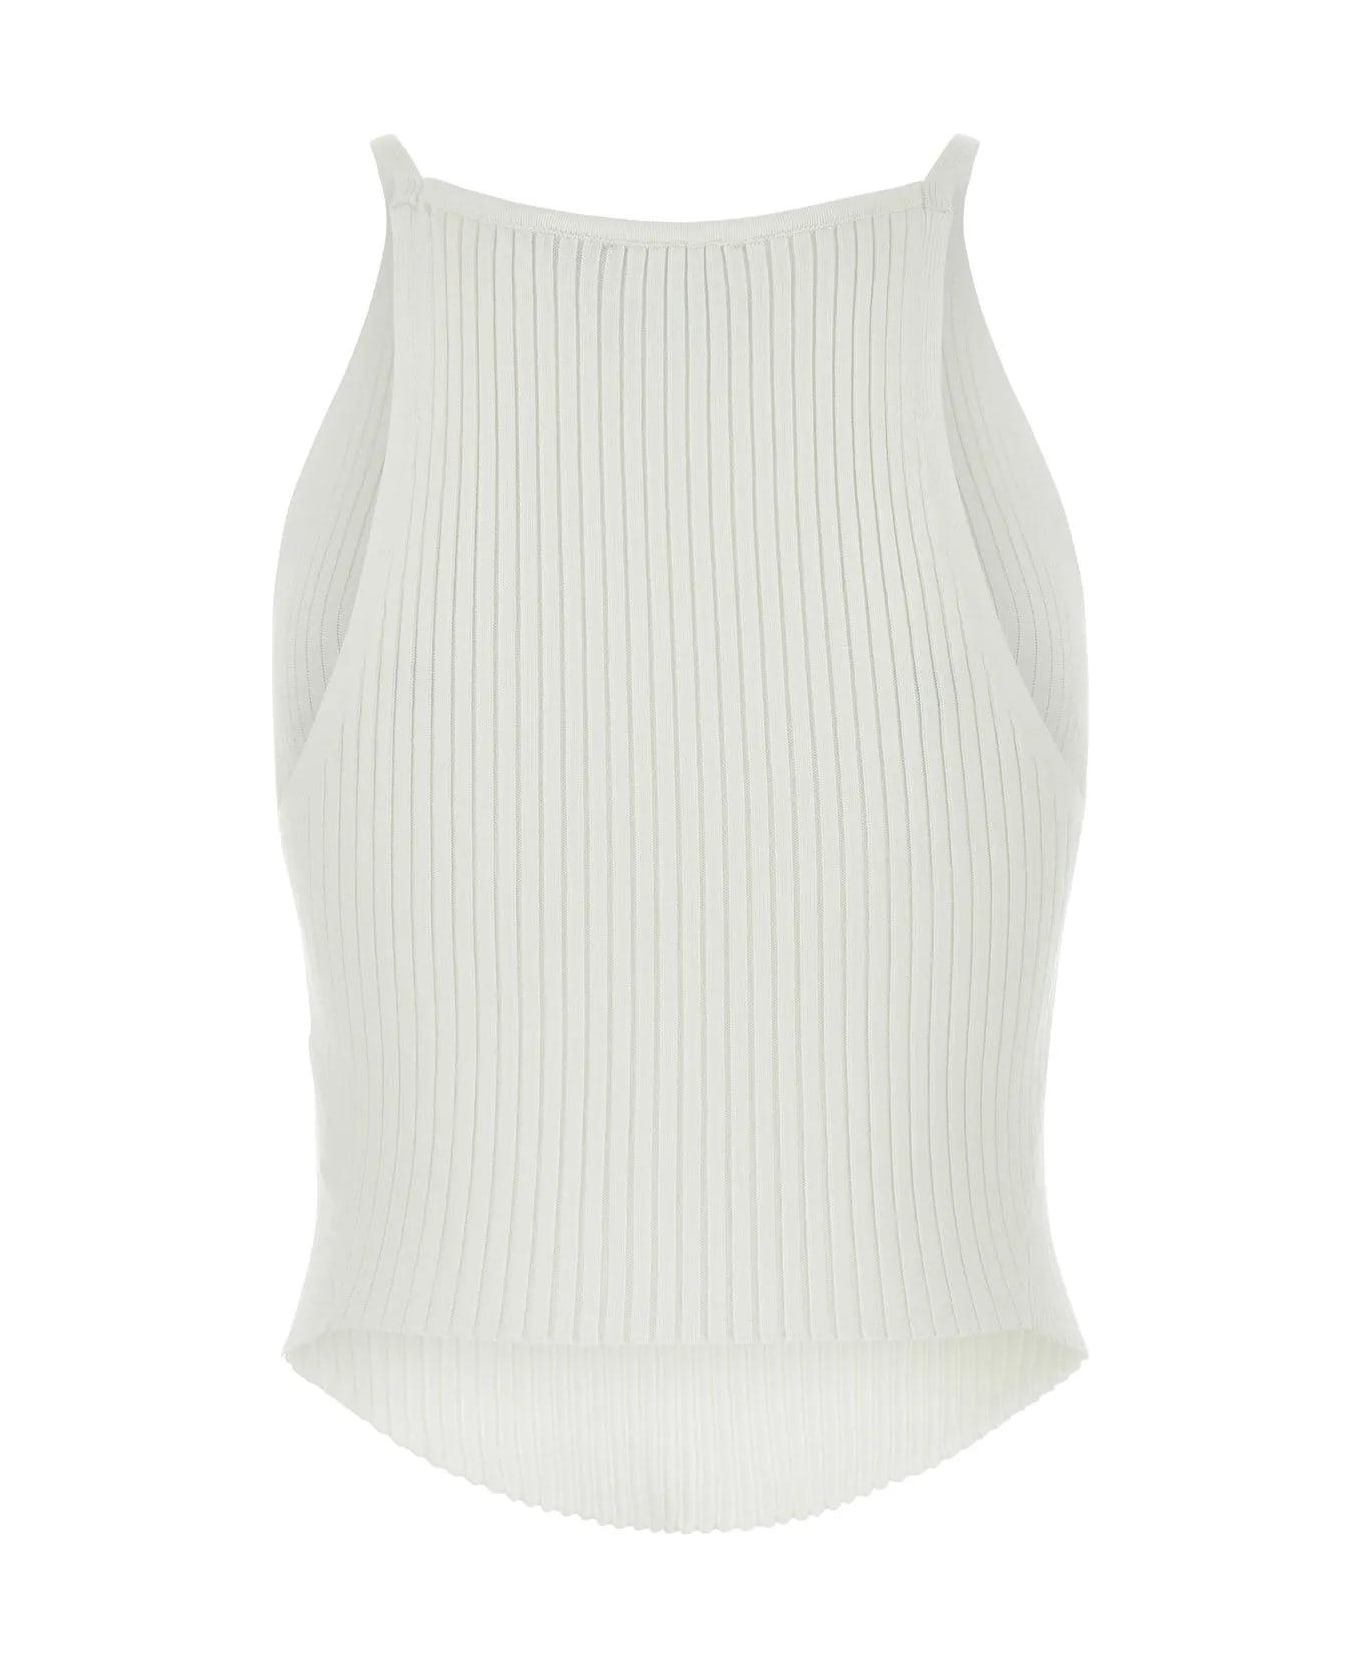 Courrèges White Viscose Blend Top - Heritage White